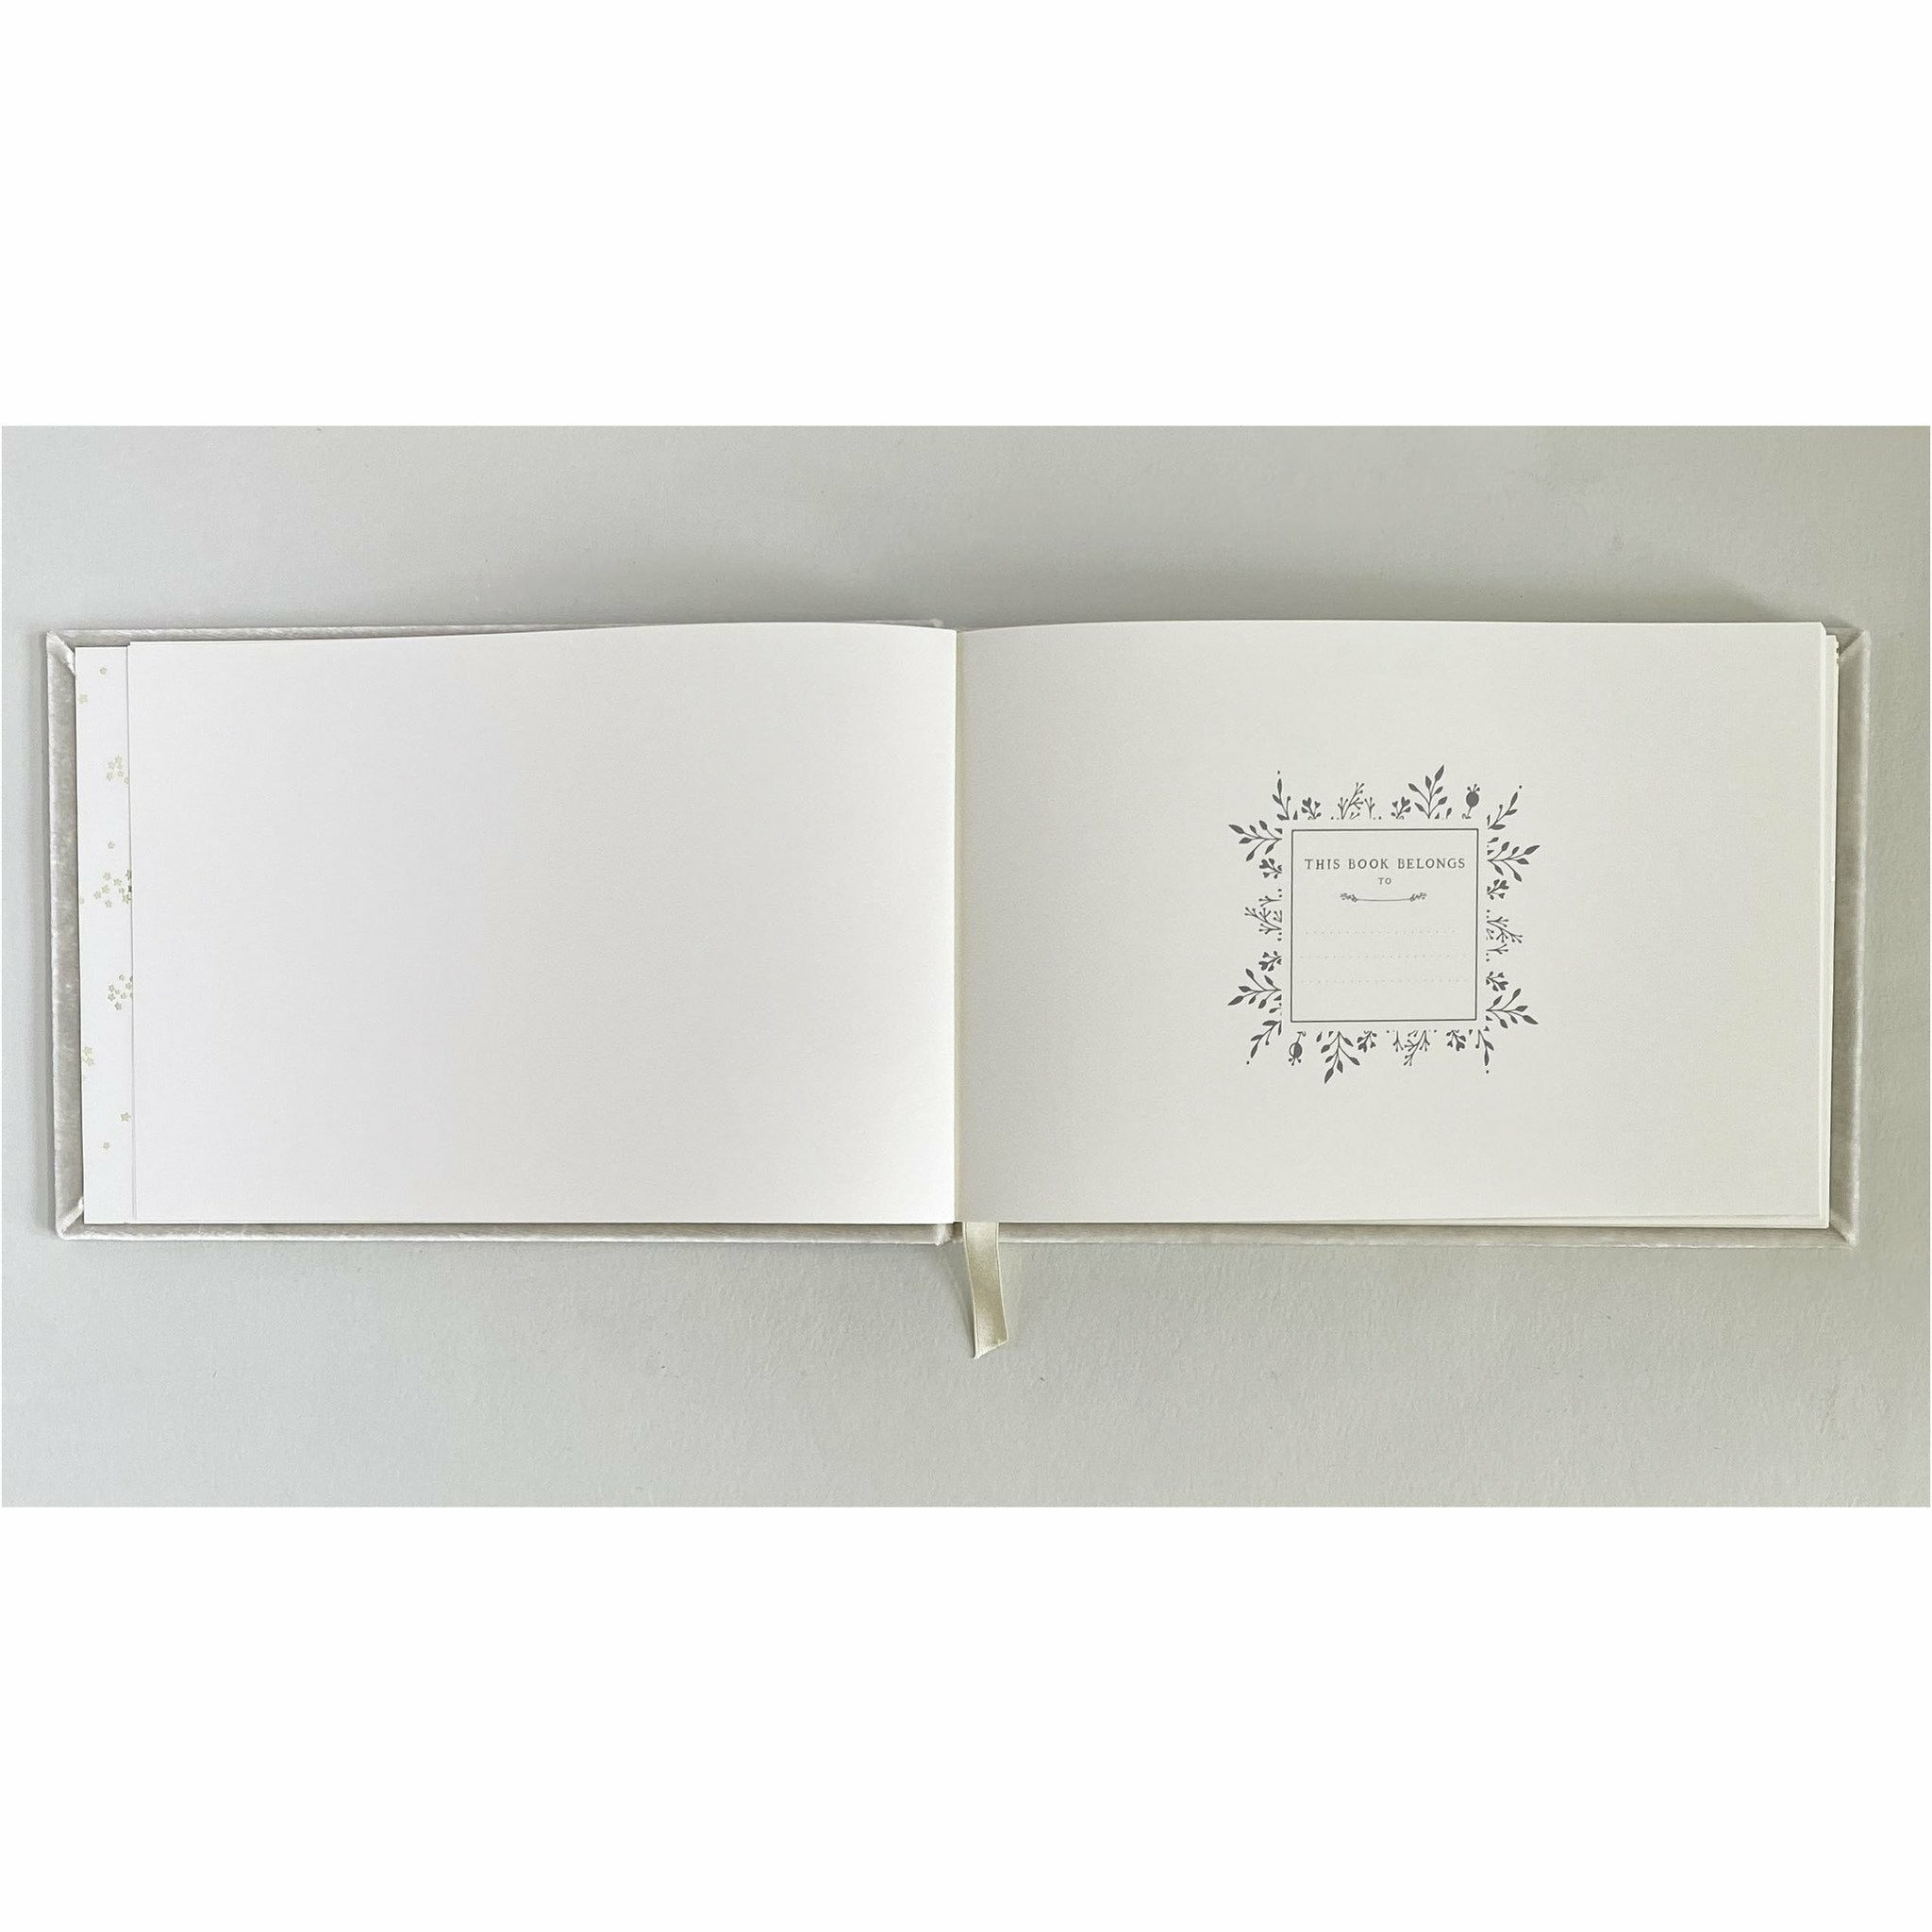 "Our Wedding"  Silk Velvet Guestbook by The First Snow - The First Snow